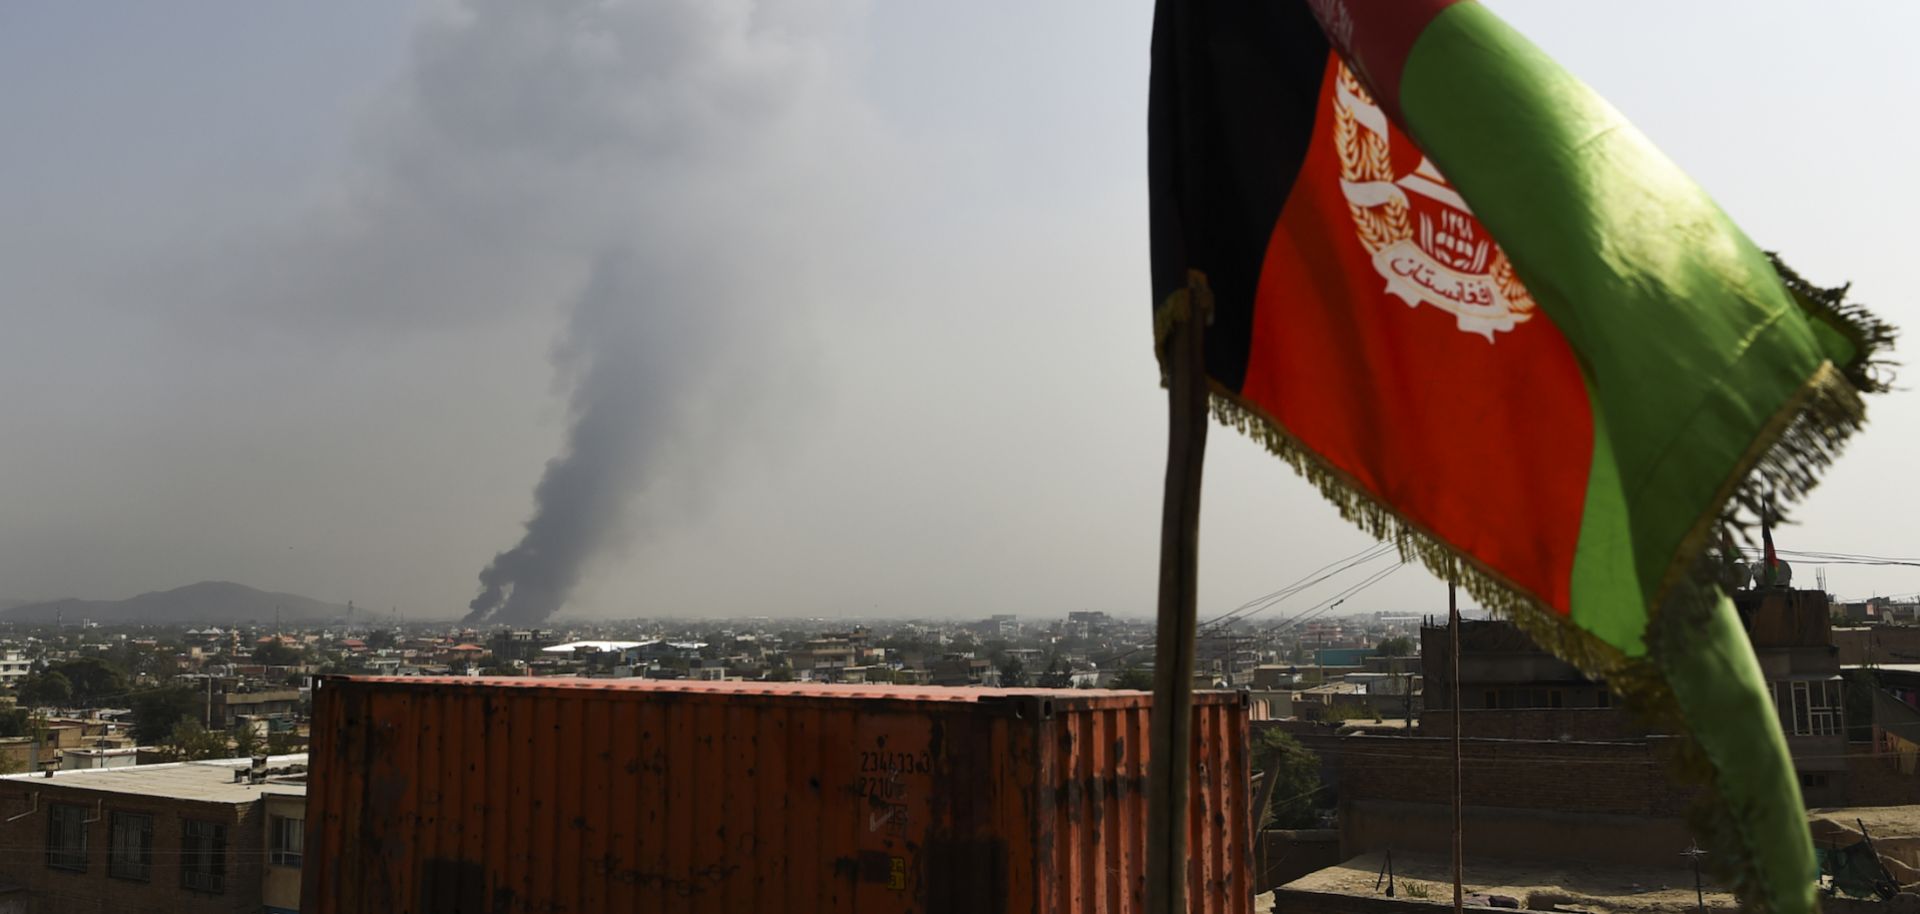 Smoke rises from the site of a Taliban attack that killed at least 16 people in Kabul, Afghanistan, on Sept. 3, 2019.